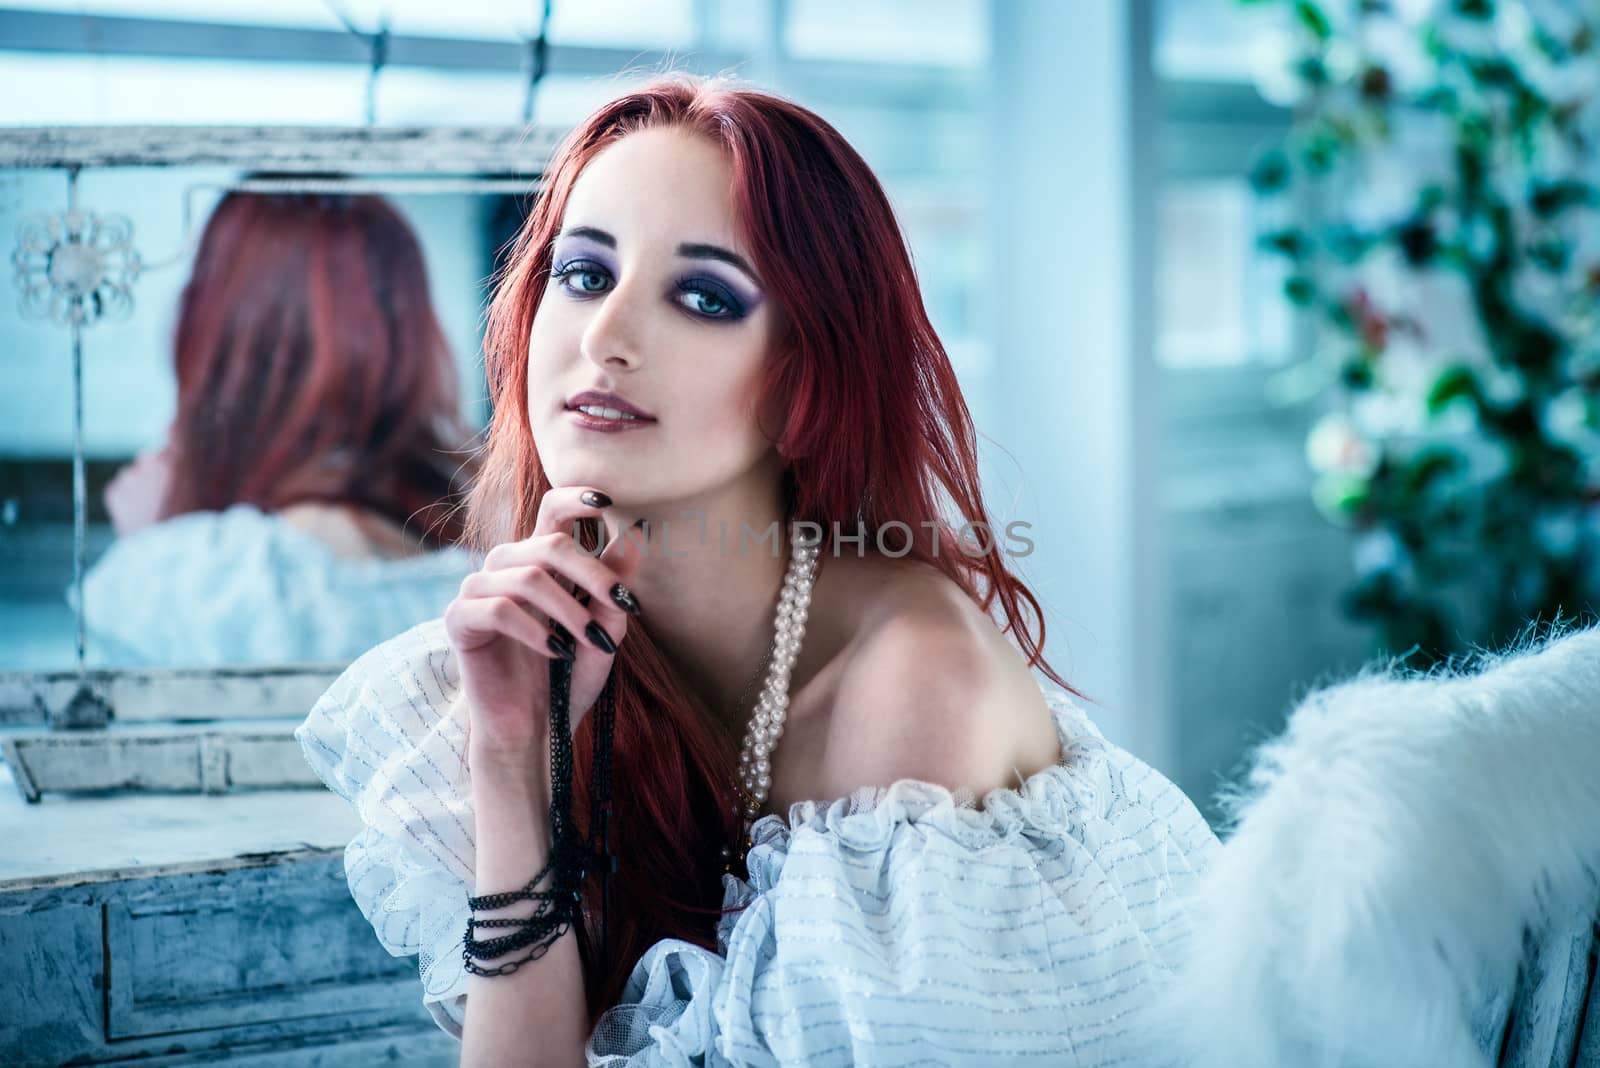 the beautiful girl with red hair in a white dress sits a back to a mirror, having added a hand under a chin